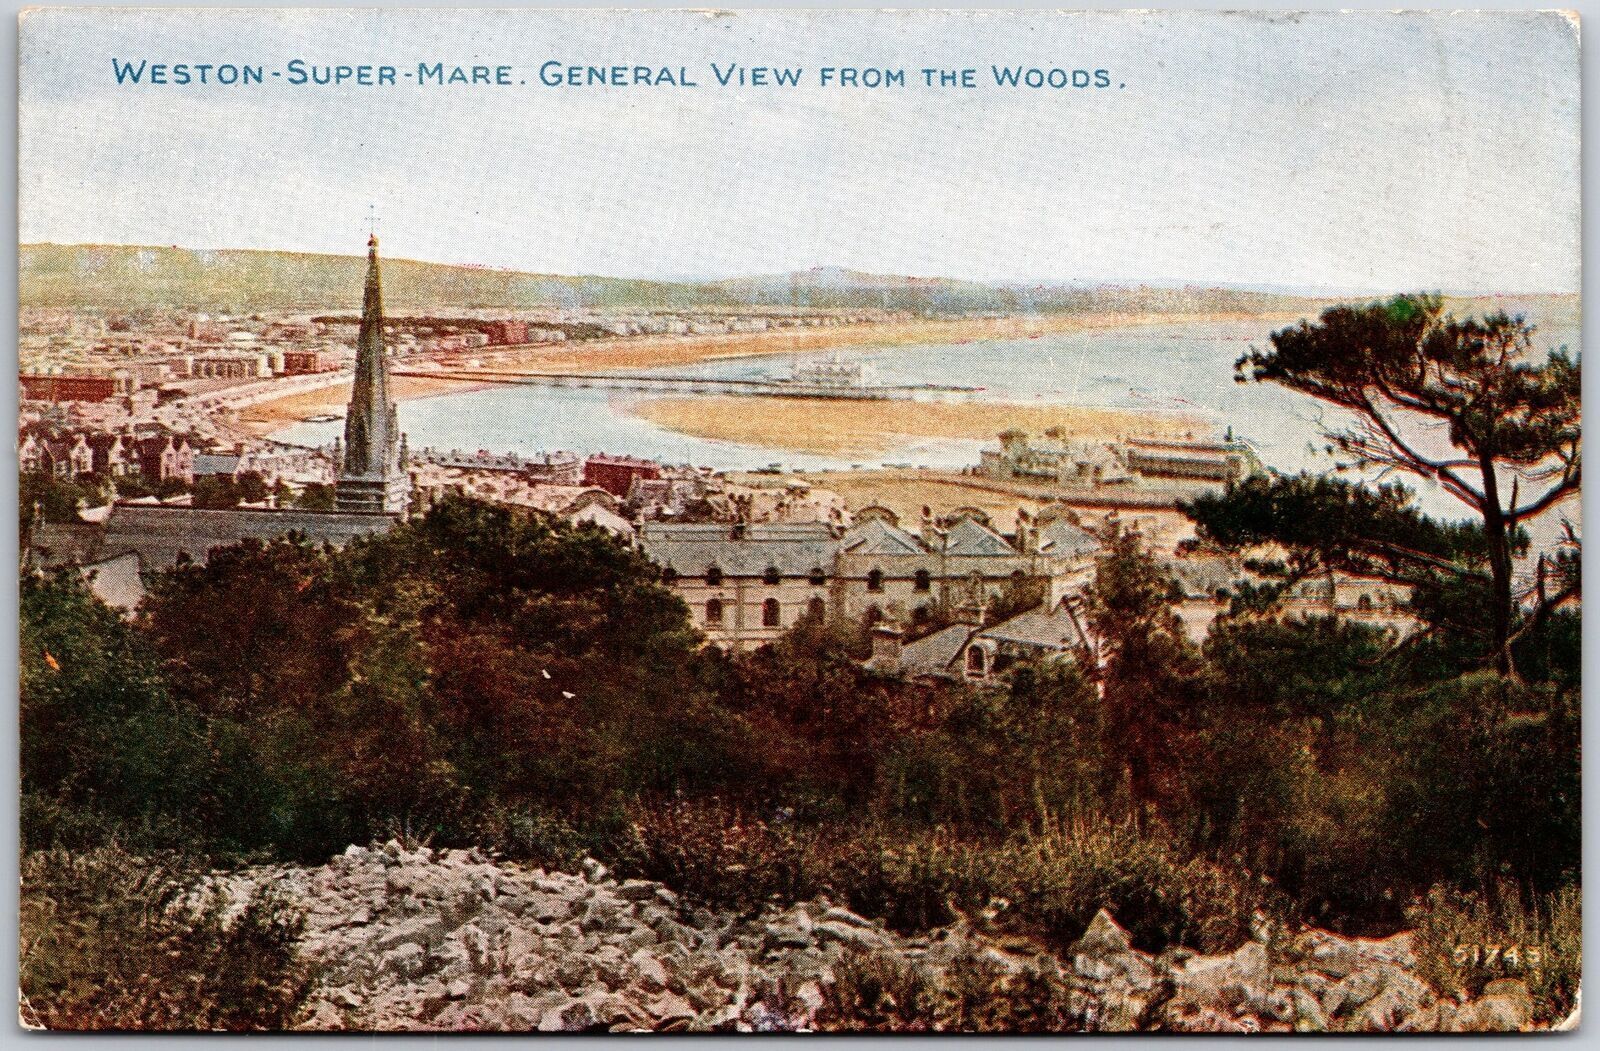 Weston-Super-Mare General View from the Woods England Beach Buildings Postcard